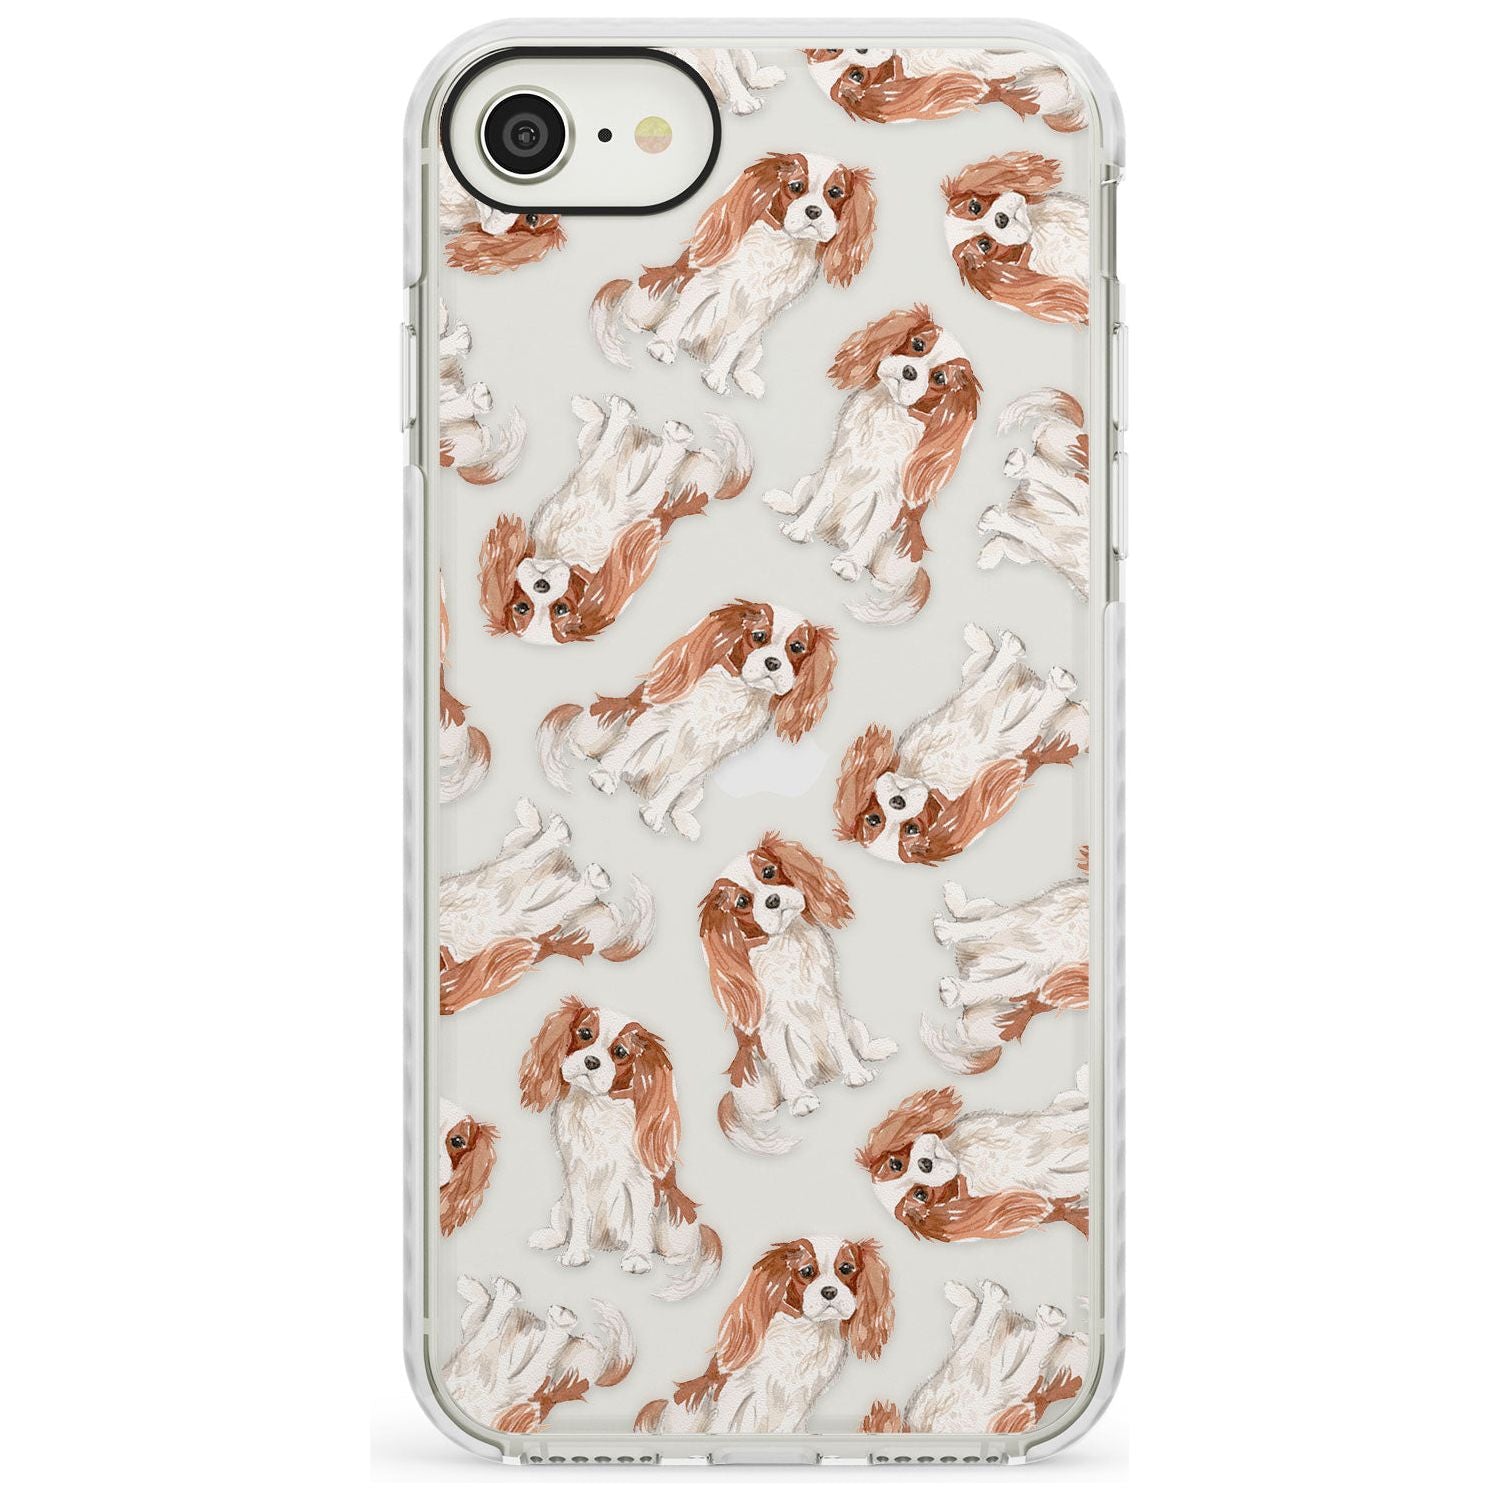 Cavalier King Charles Spaniel Dog Pattern Impact Phone Case for iPhone SE 8 7 Plus